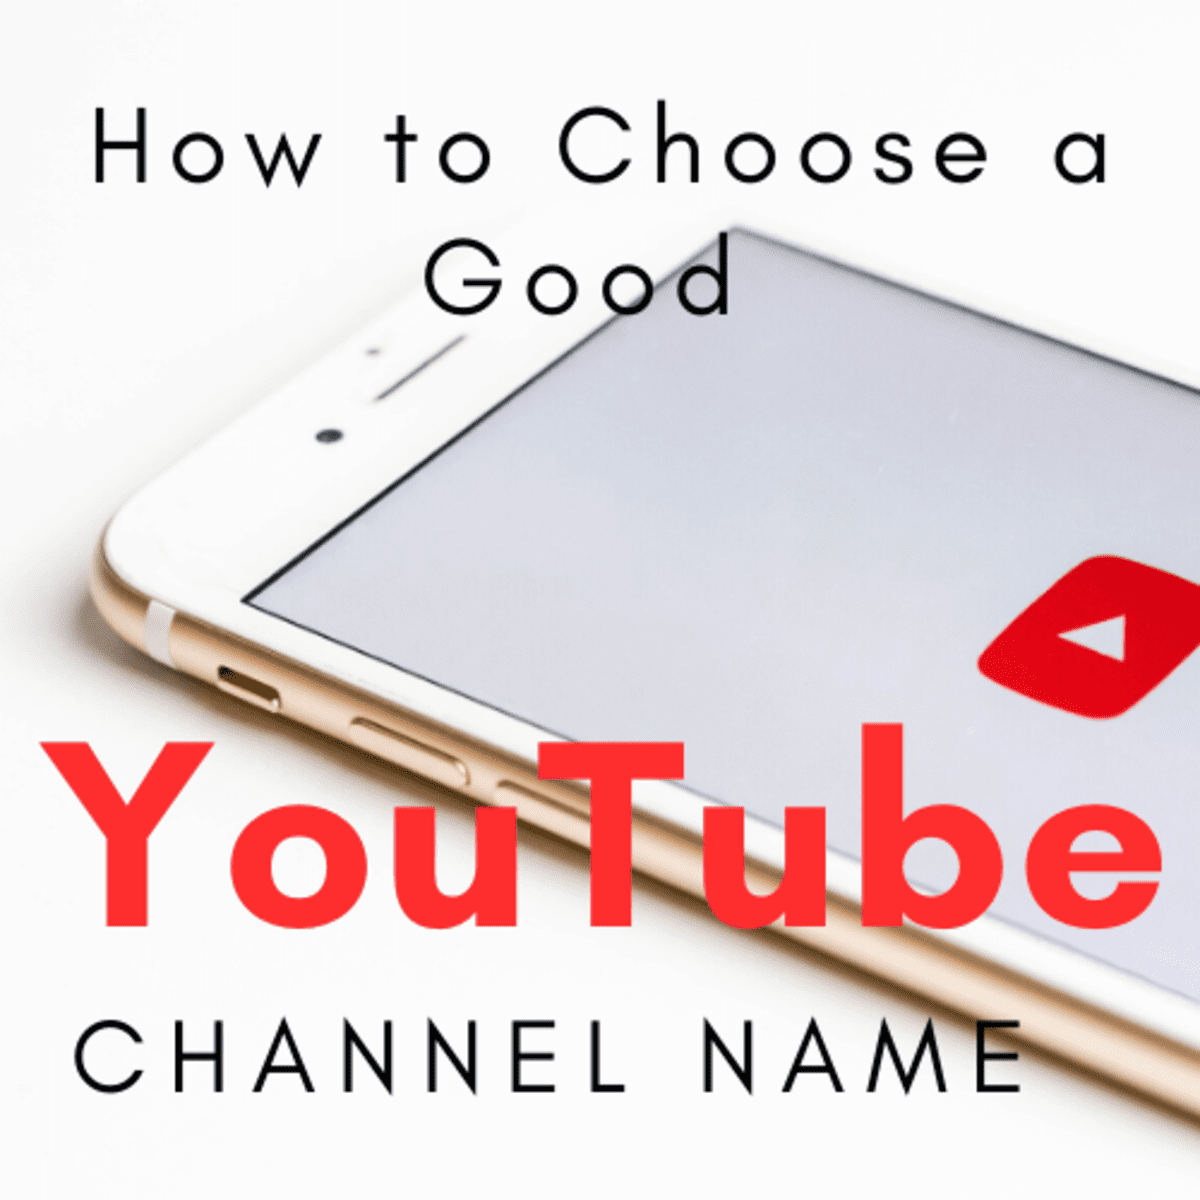 How To Change Your YouTube Channel Name 2020  Complete Guide  YouTube